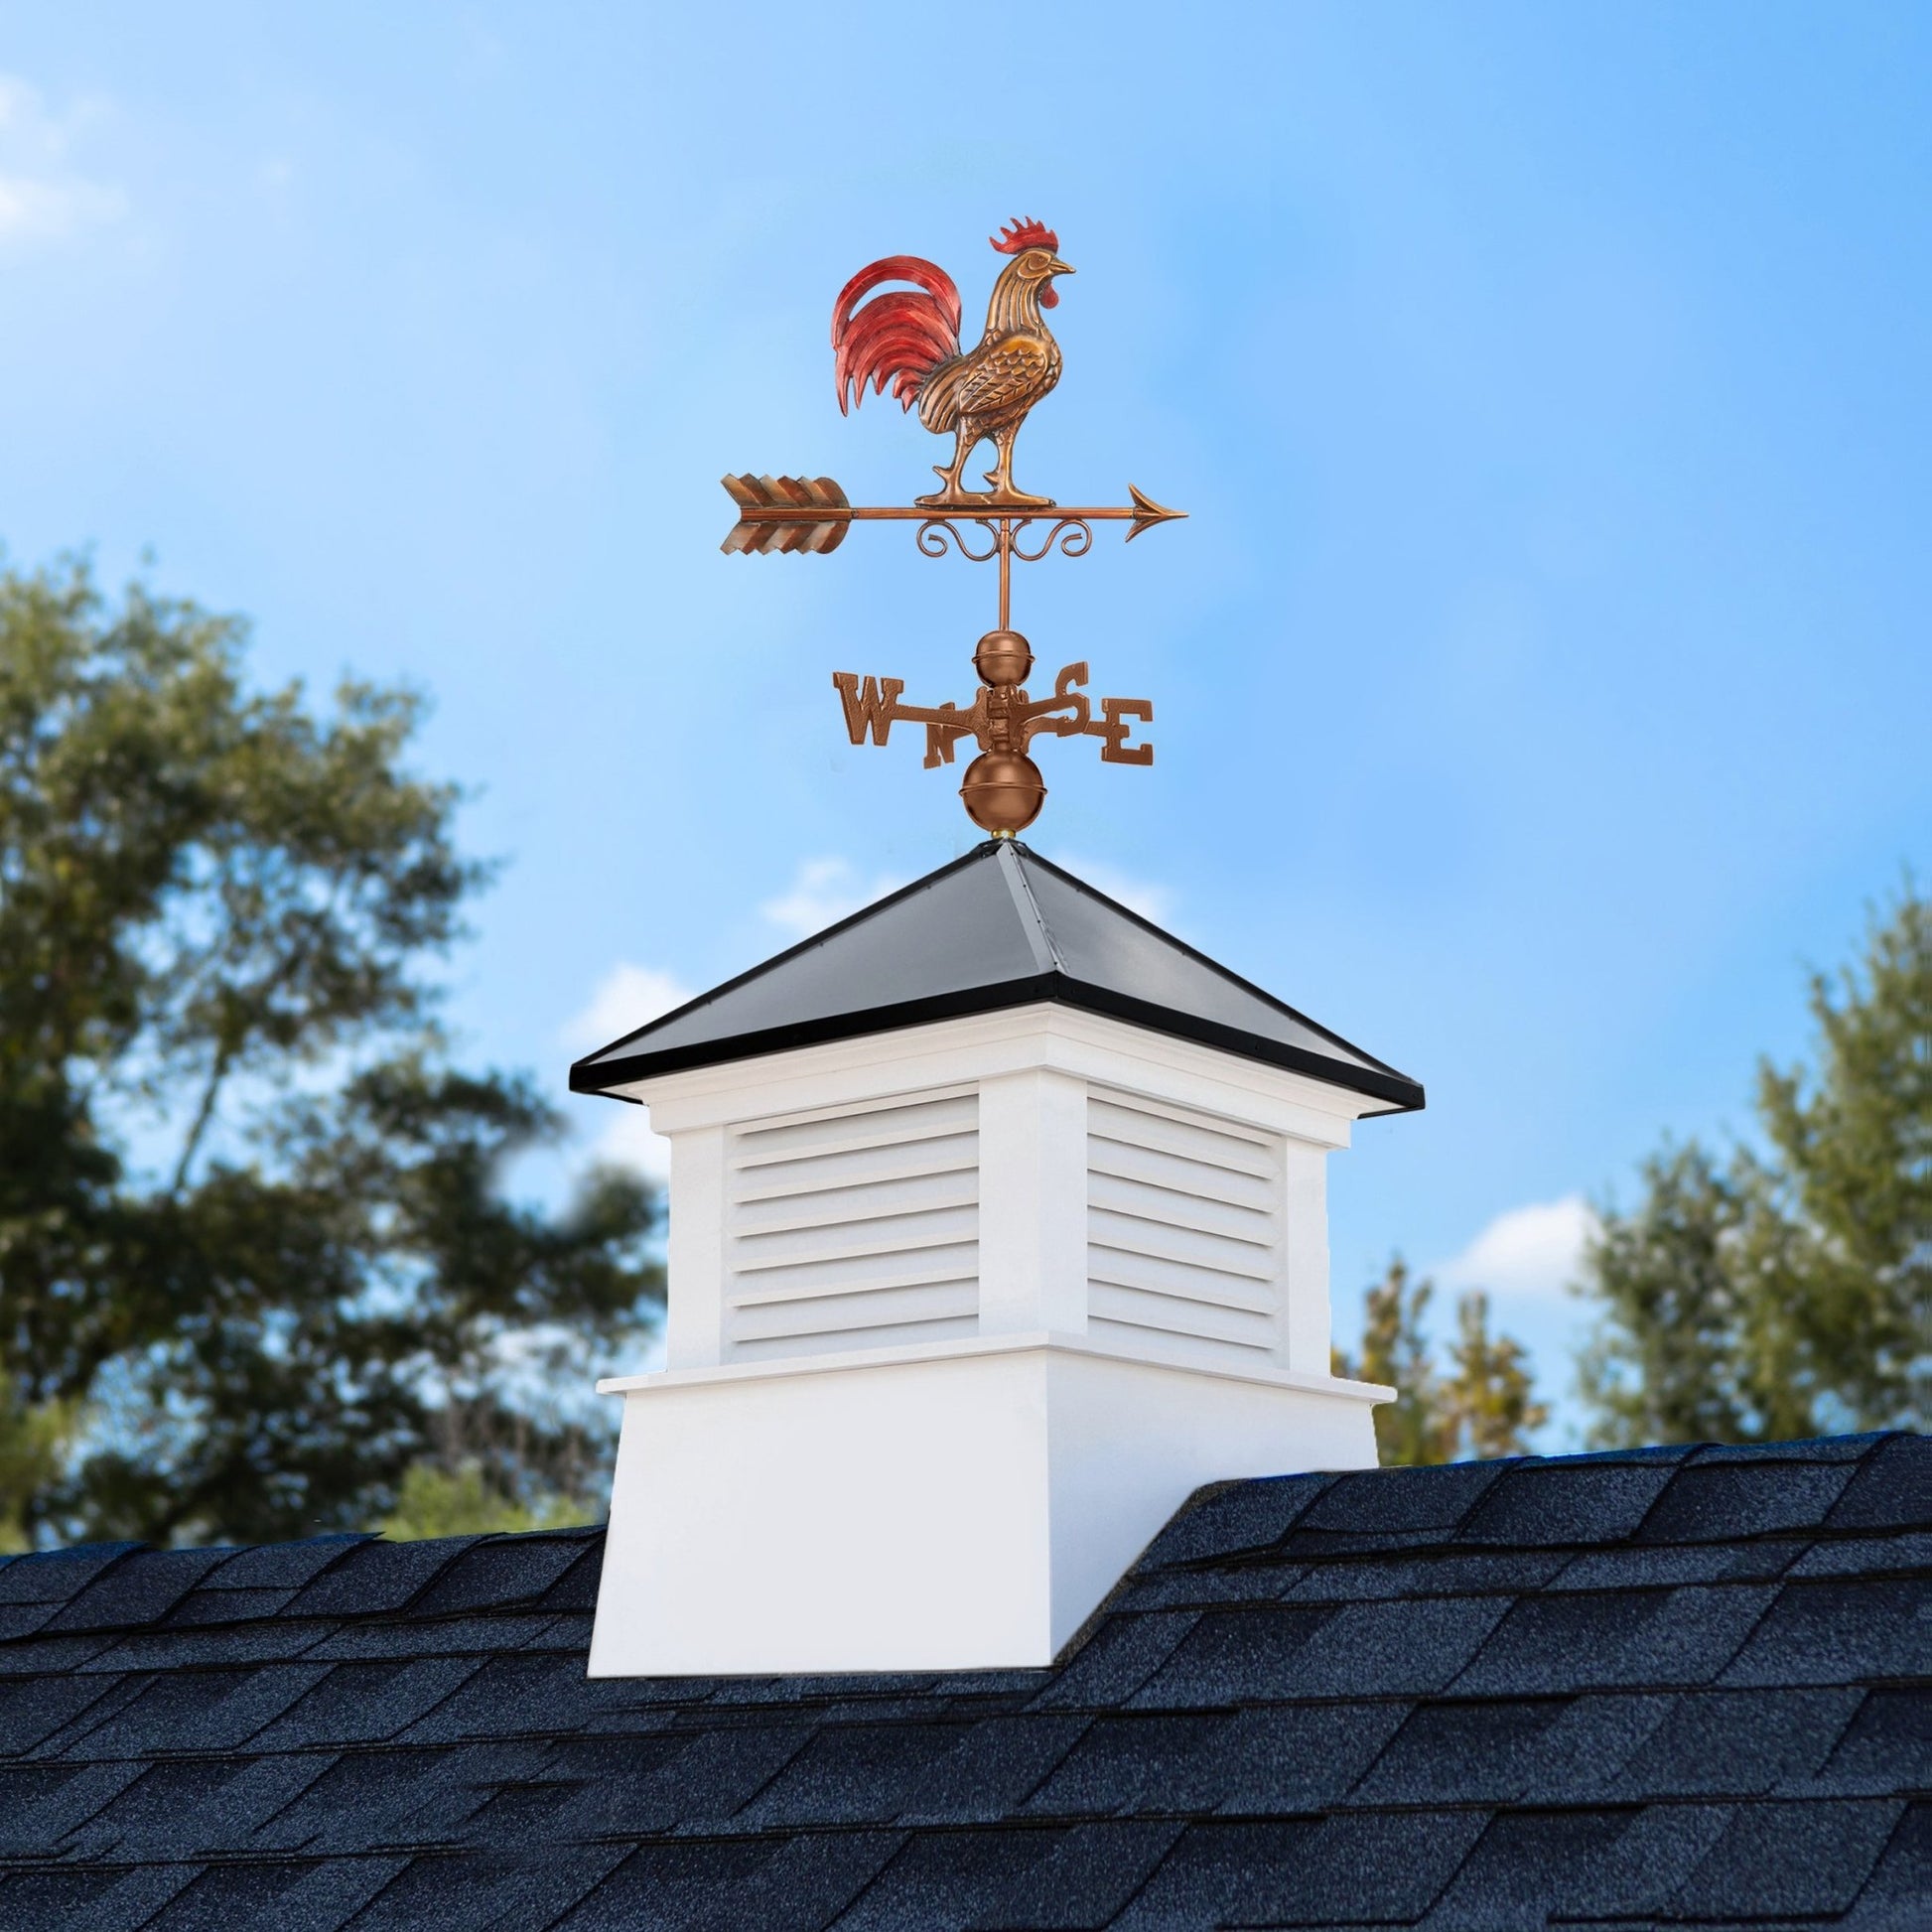 30" Square Manchester Vinyl Cupola with Black Aluminum Roof and Red Rooster Weathervane by Good Directions - Good Directions